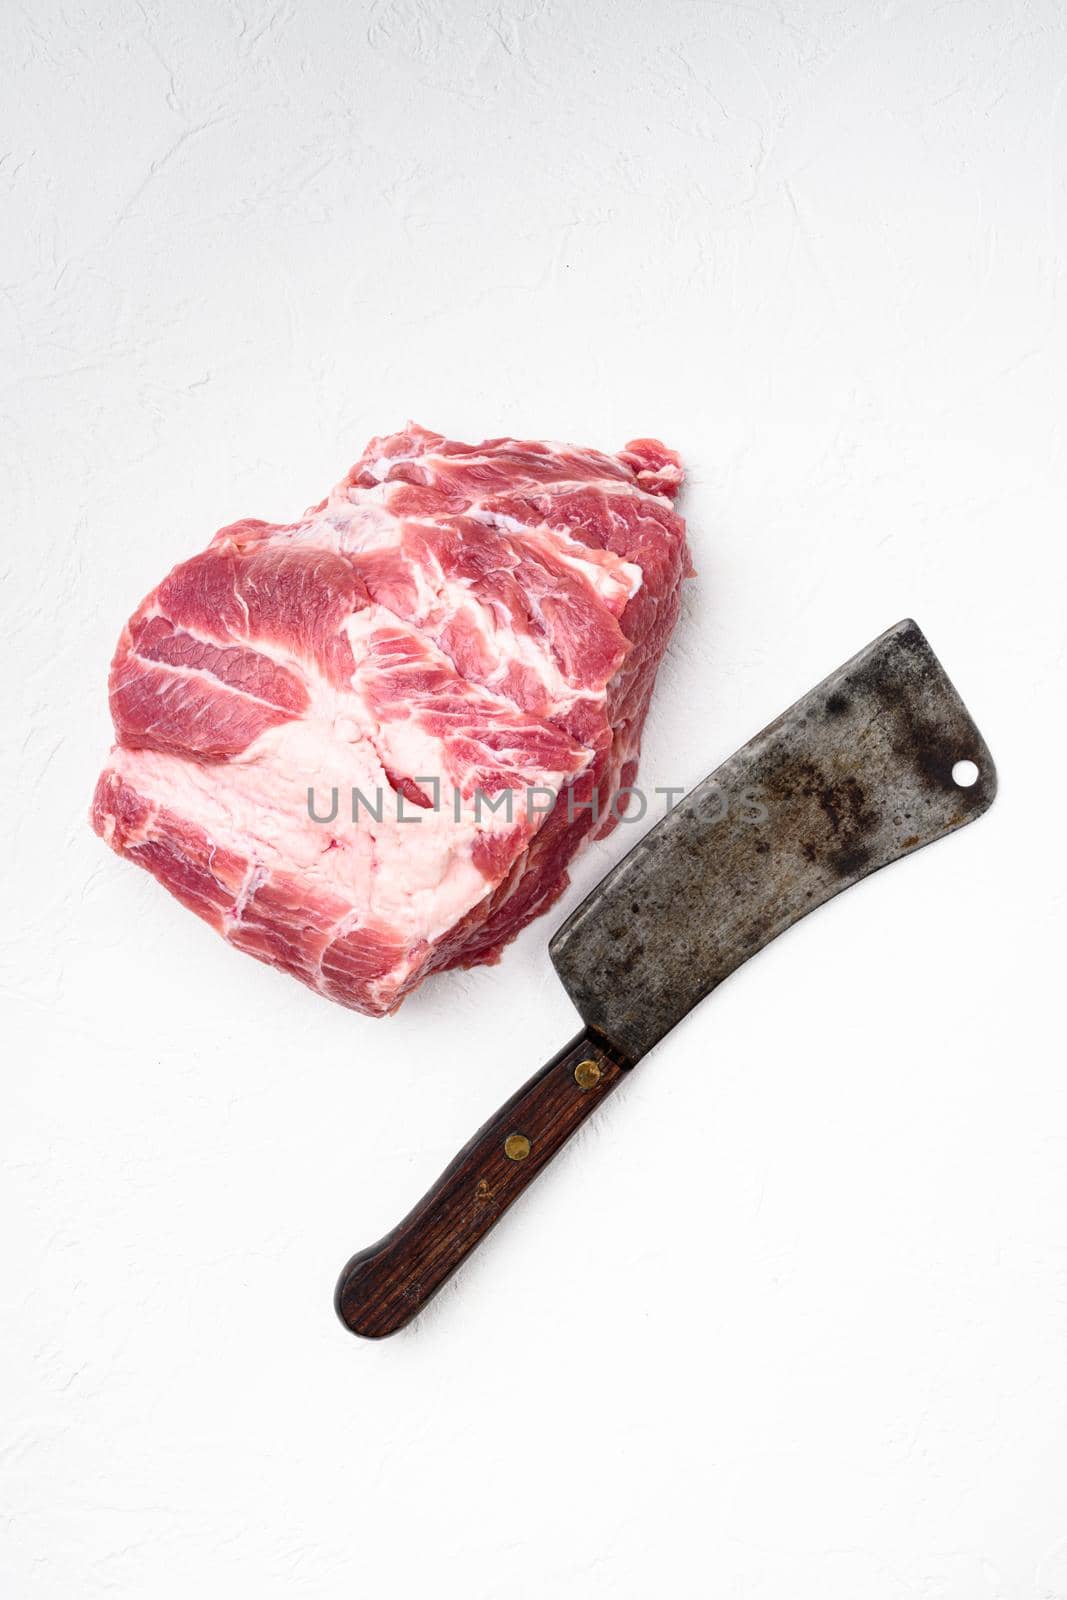 Pork shoulder fresh raw meat set , with old butcher cleaver knife, on white stone table background, top view flat lay, with copy space for text